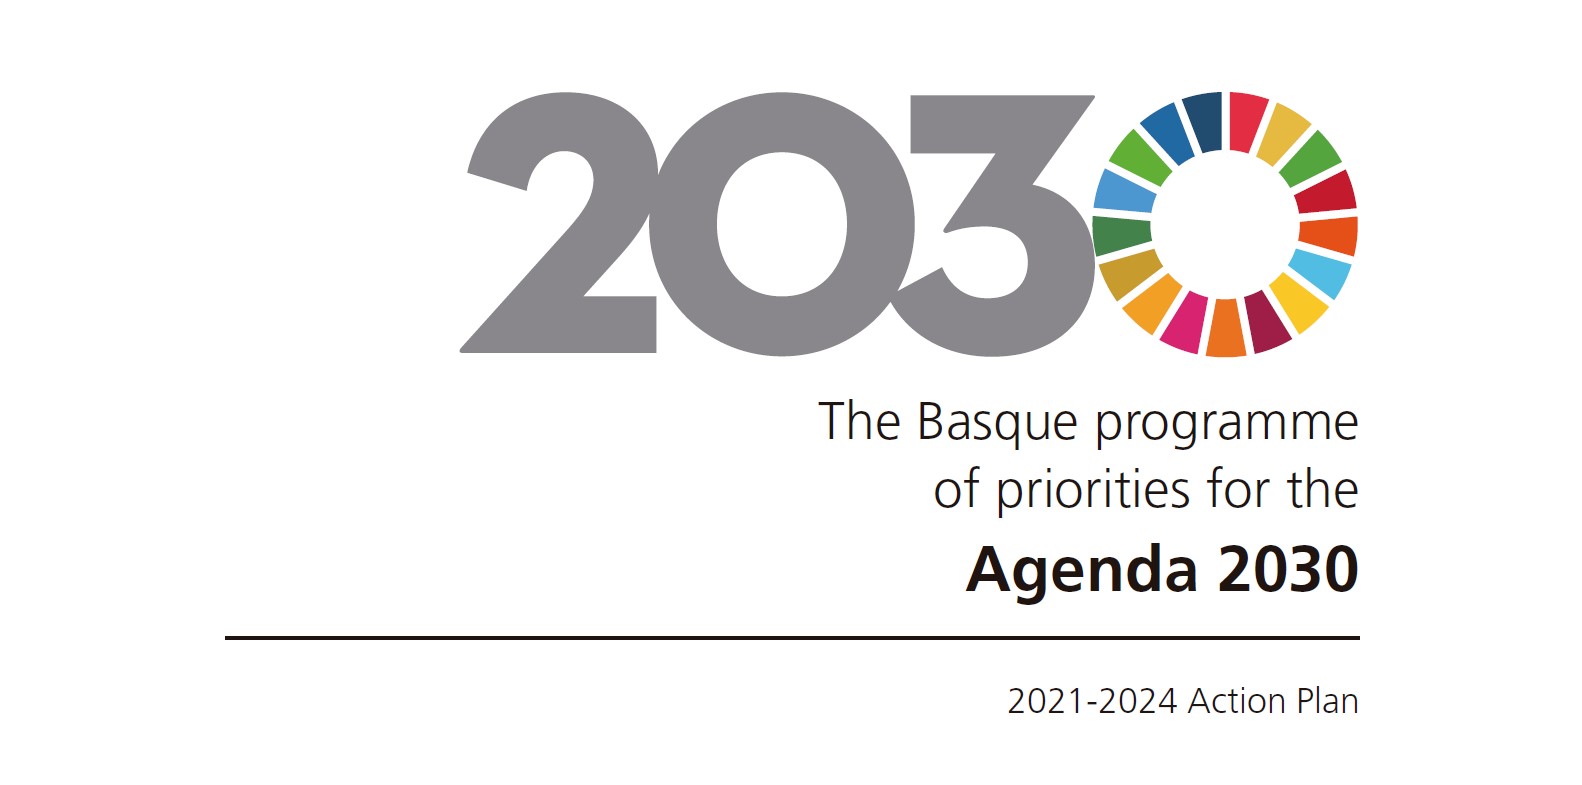 The Basque programme of priorities for the Agenda 2030